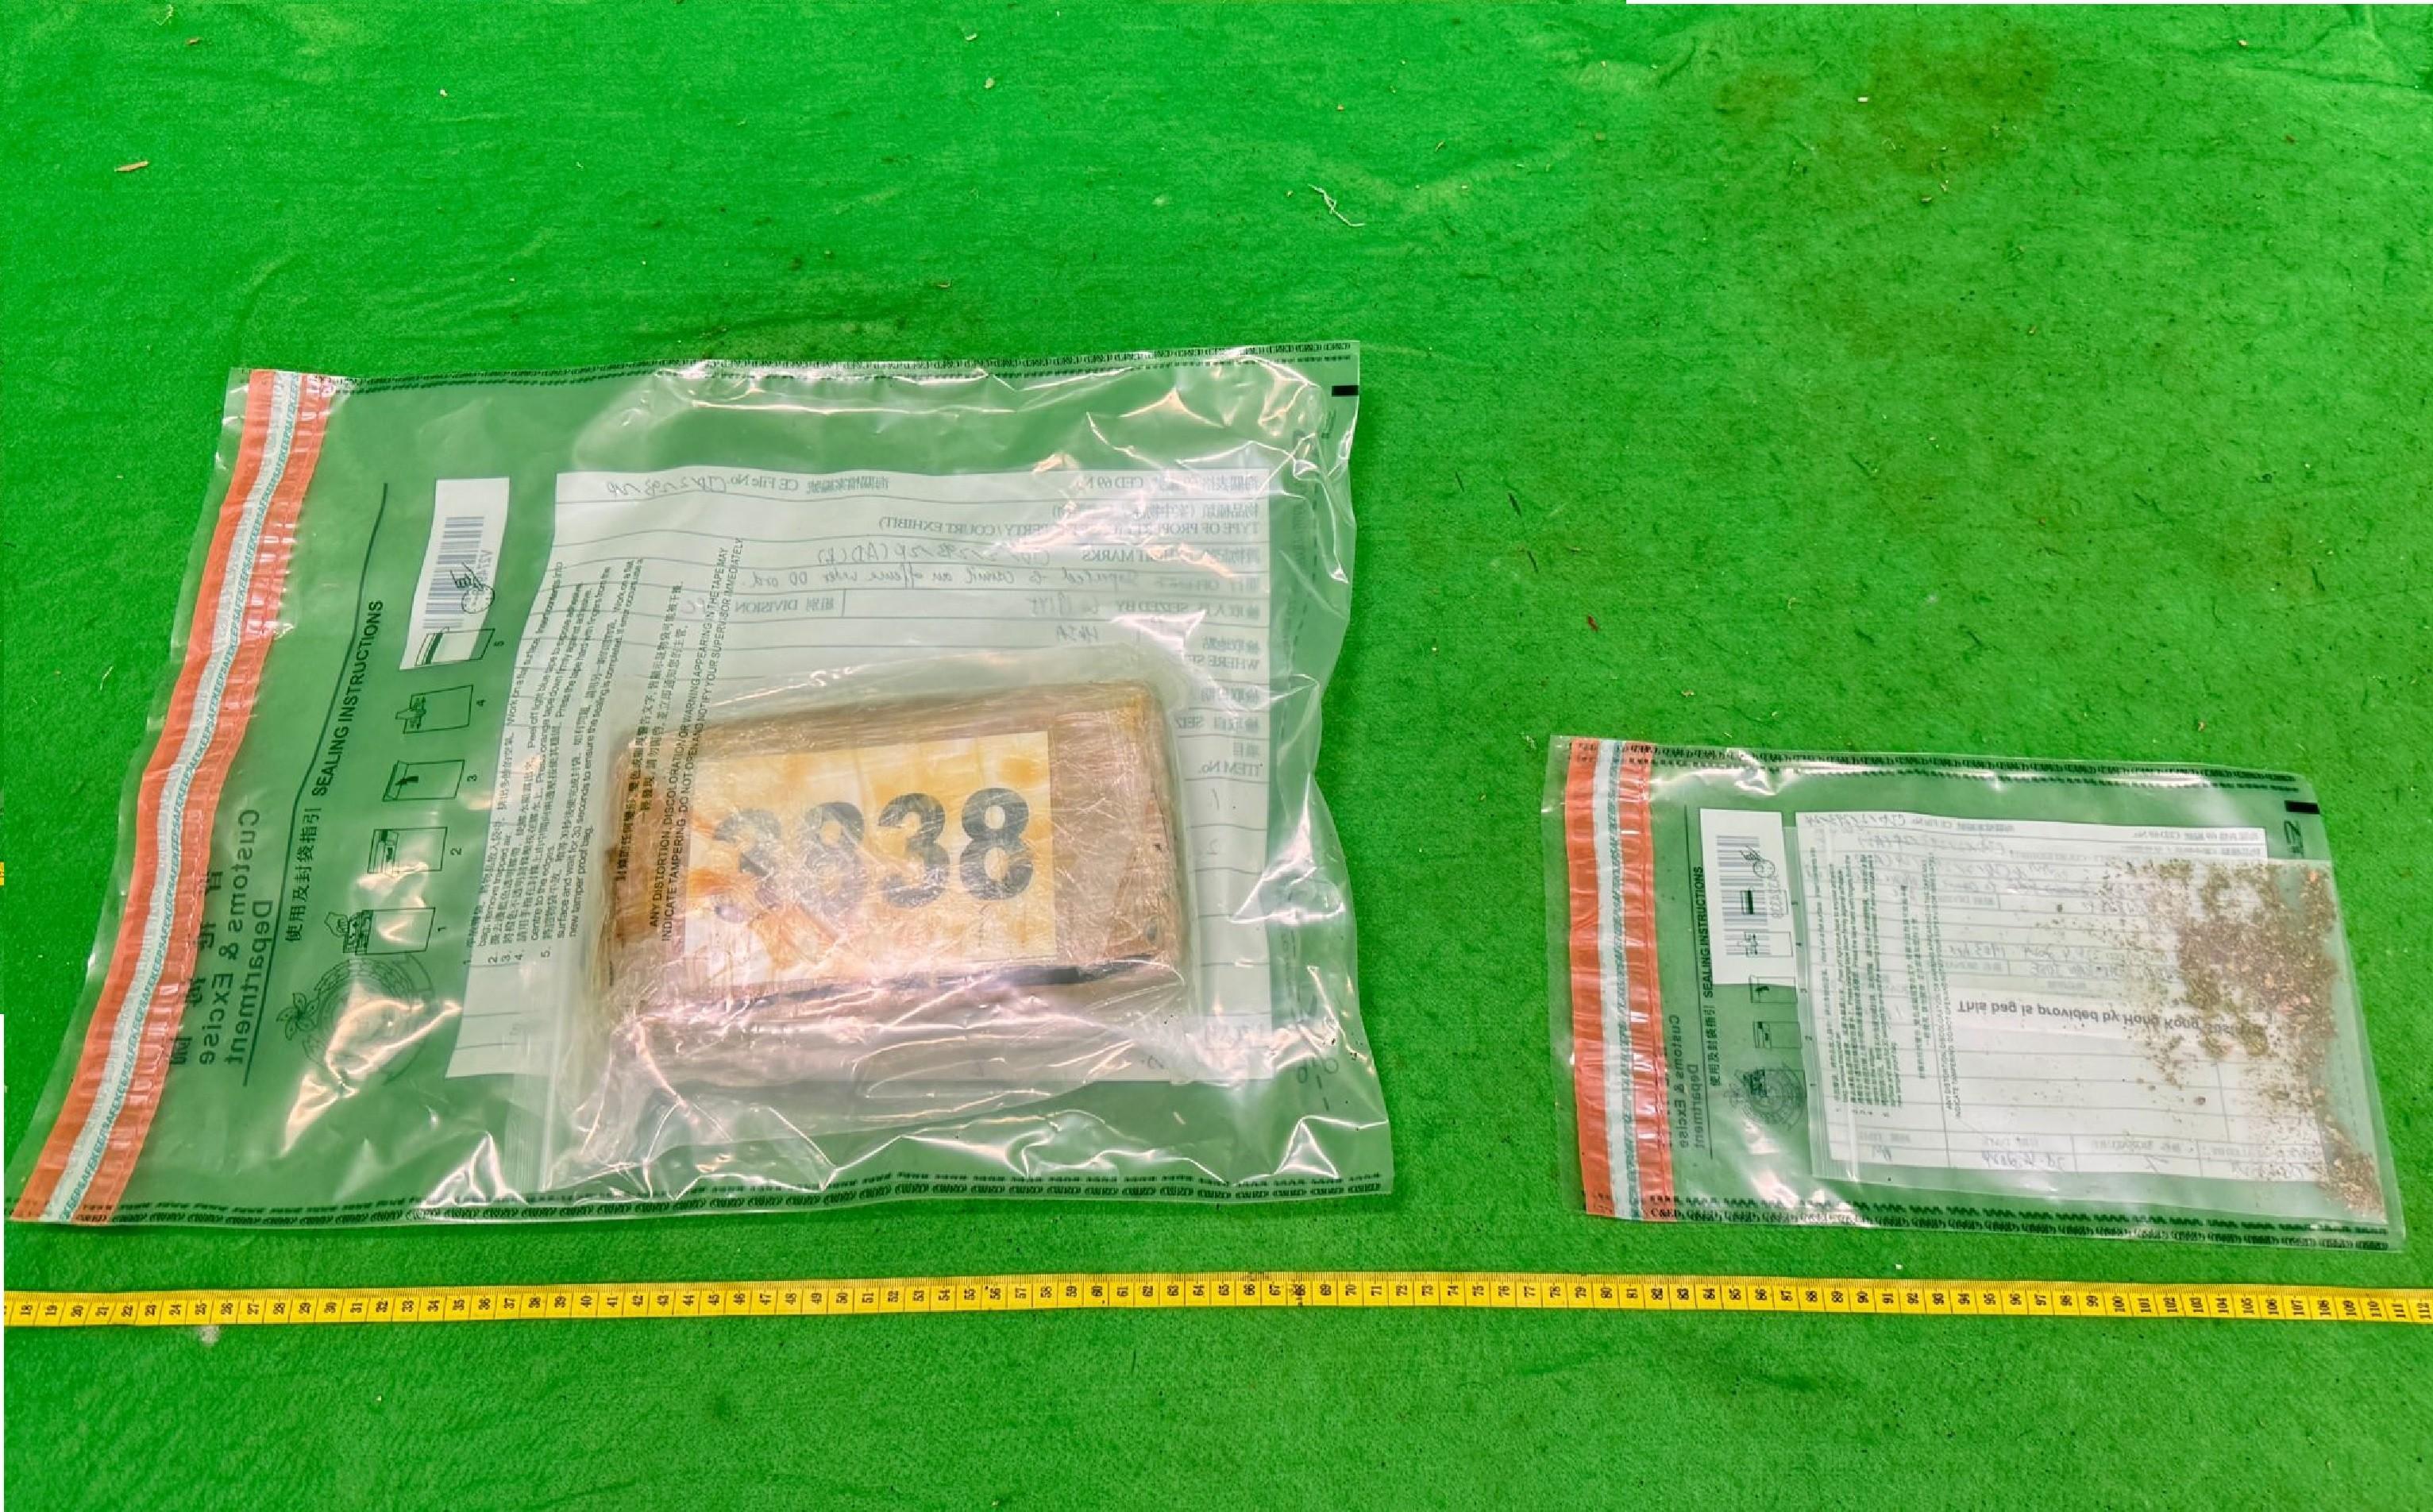 Hong Kong Customs yesterday (April 24) detected a passenger drug trafficking case at Hong Kong International Airport and seized about 1 kilogram of suspected cocaine and about 1 gram of suspected cannabis buds with an estimated market value of about $1.2 million. Photo shows the suspected dangerous drugs seized.